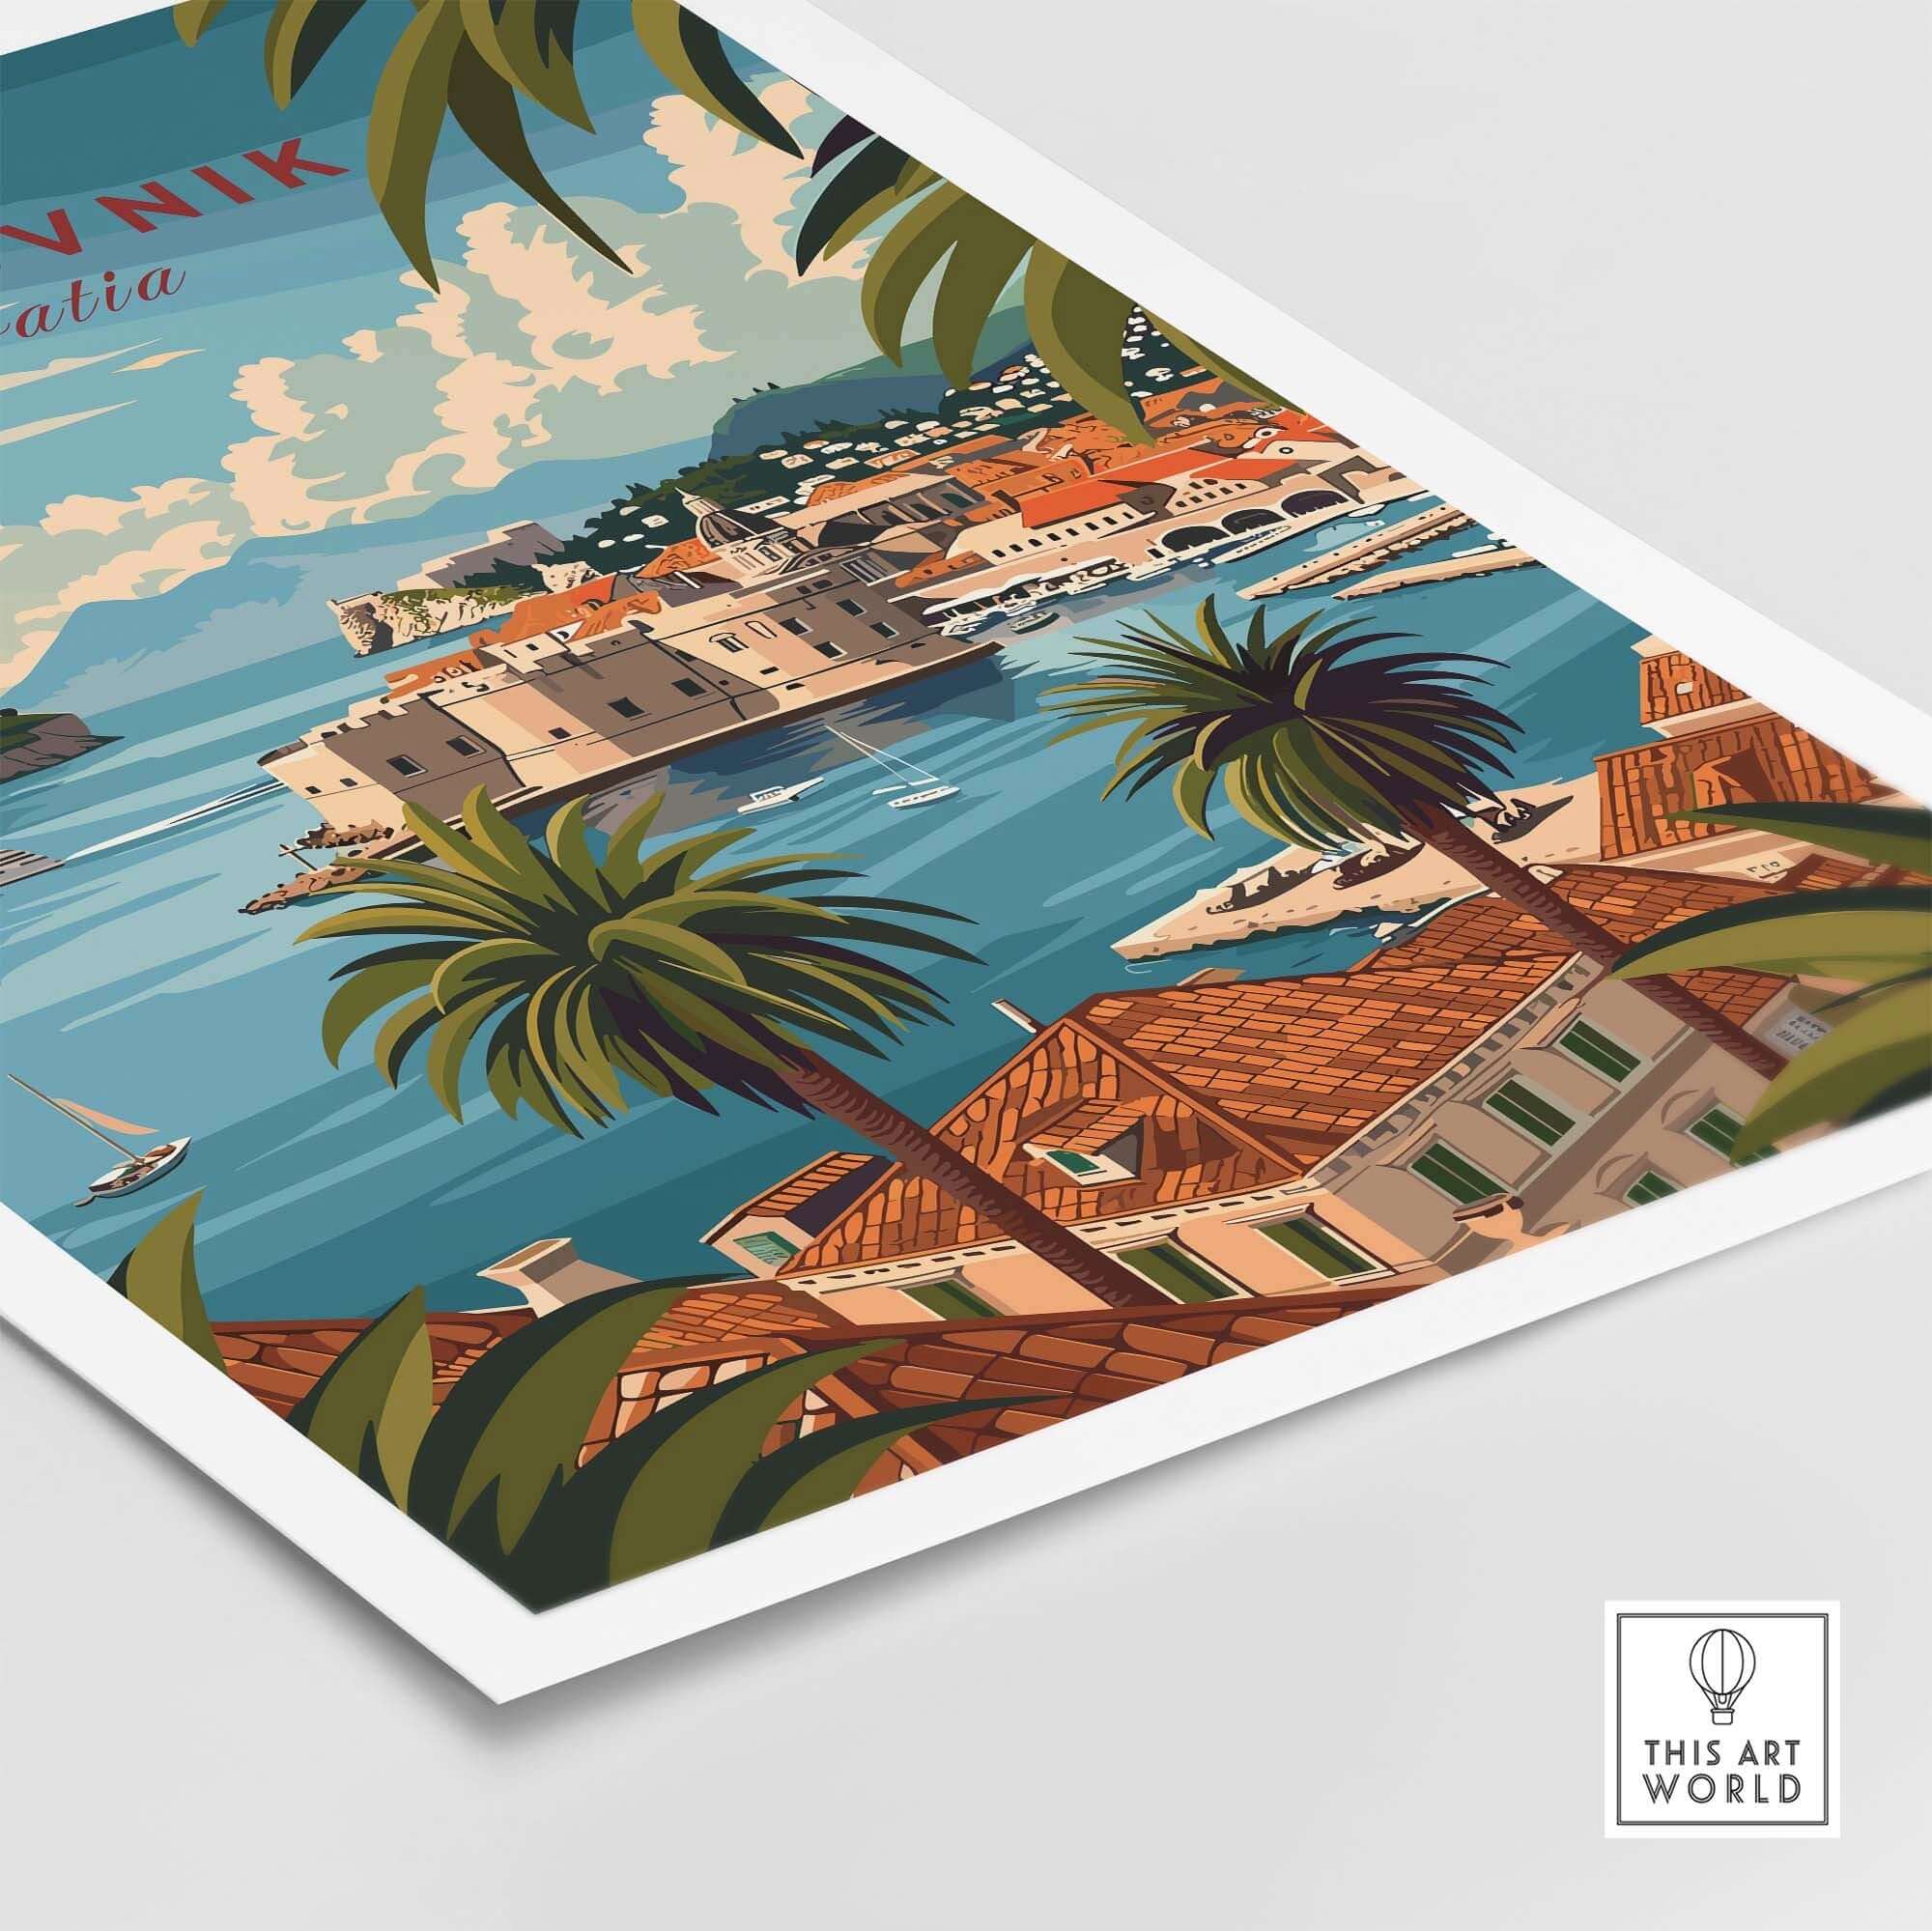 Dubrovnik Travel Poster view our best collection or travel posters and prints - ThisArtWorld